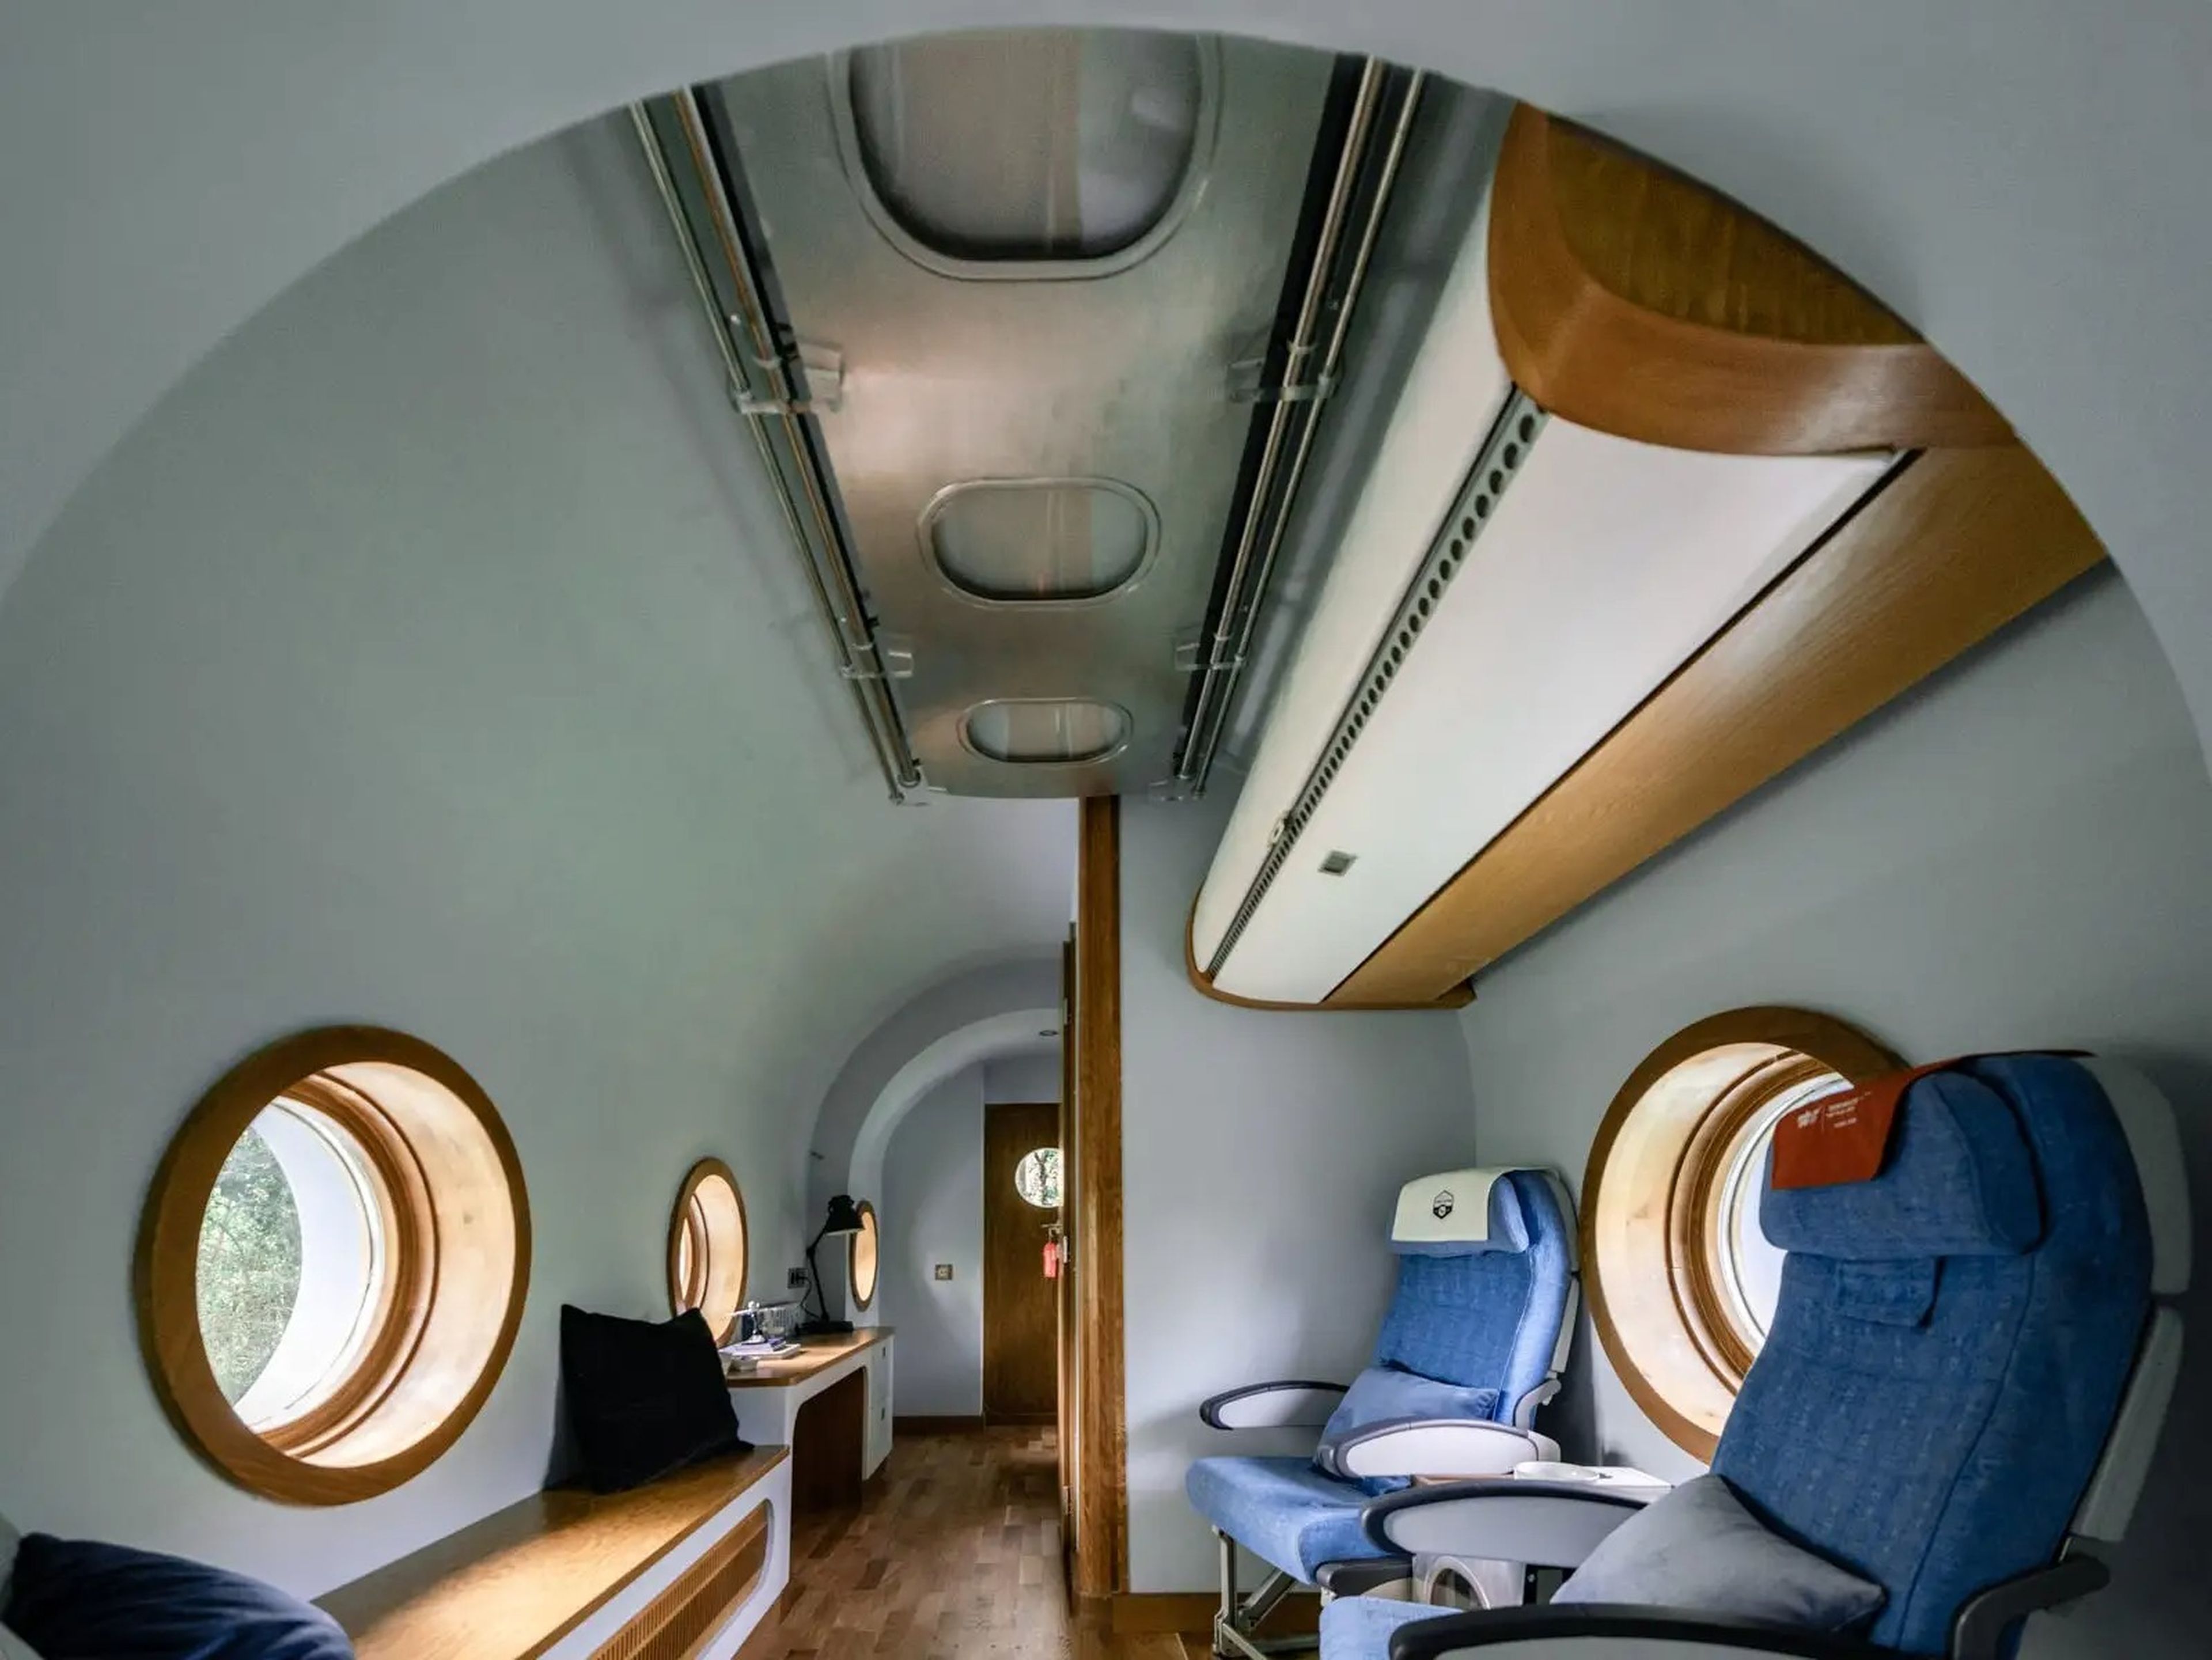 The interiors of the Jet House have curved walls and ceiling.